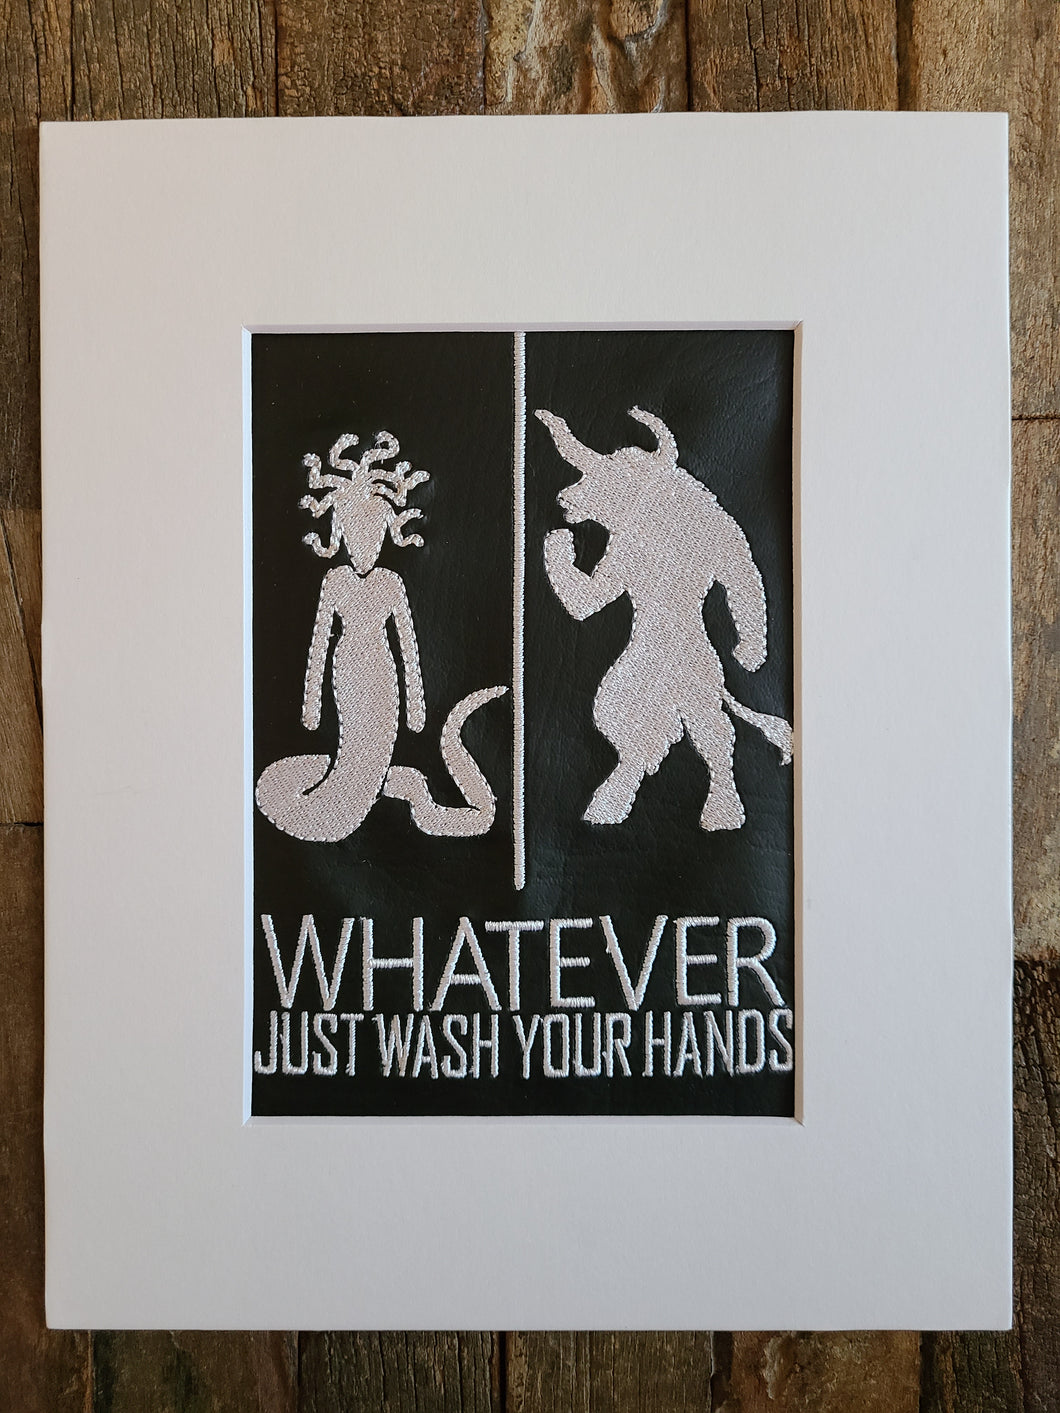 Embroidered Wall Hanging - Geeky Embroidery - Whatever, Just Wash Your Hands - Medusa And Minotaur - Black And White - Bathroom Decor